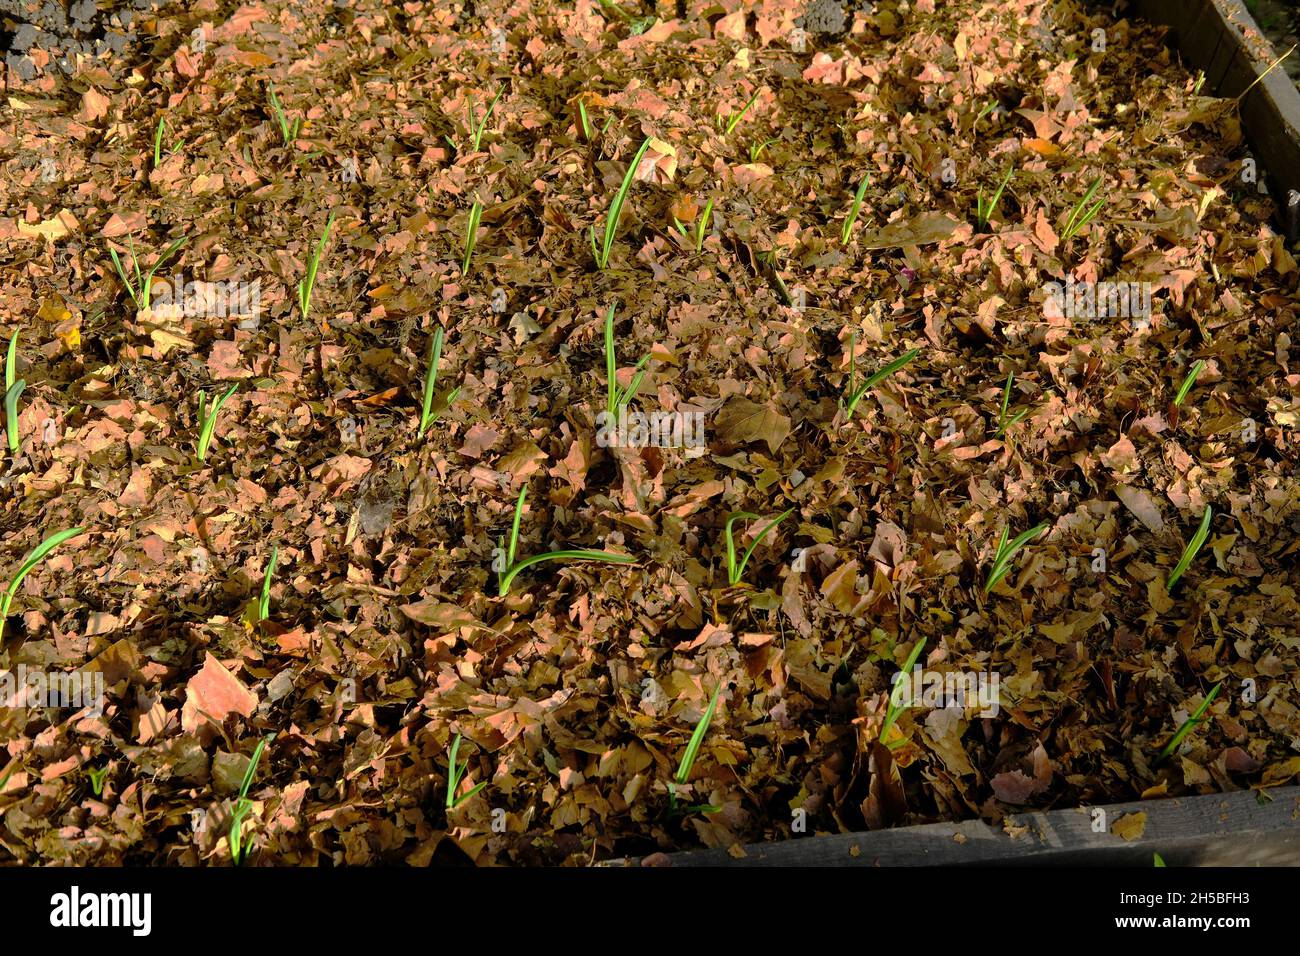 Growing garlic mulched with leaves in the autumn sunshine. Stock Photo